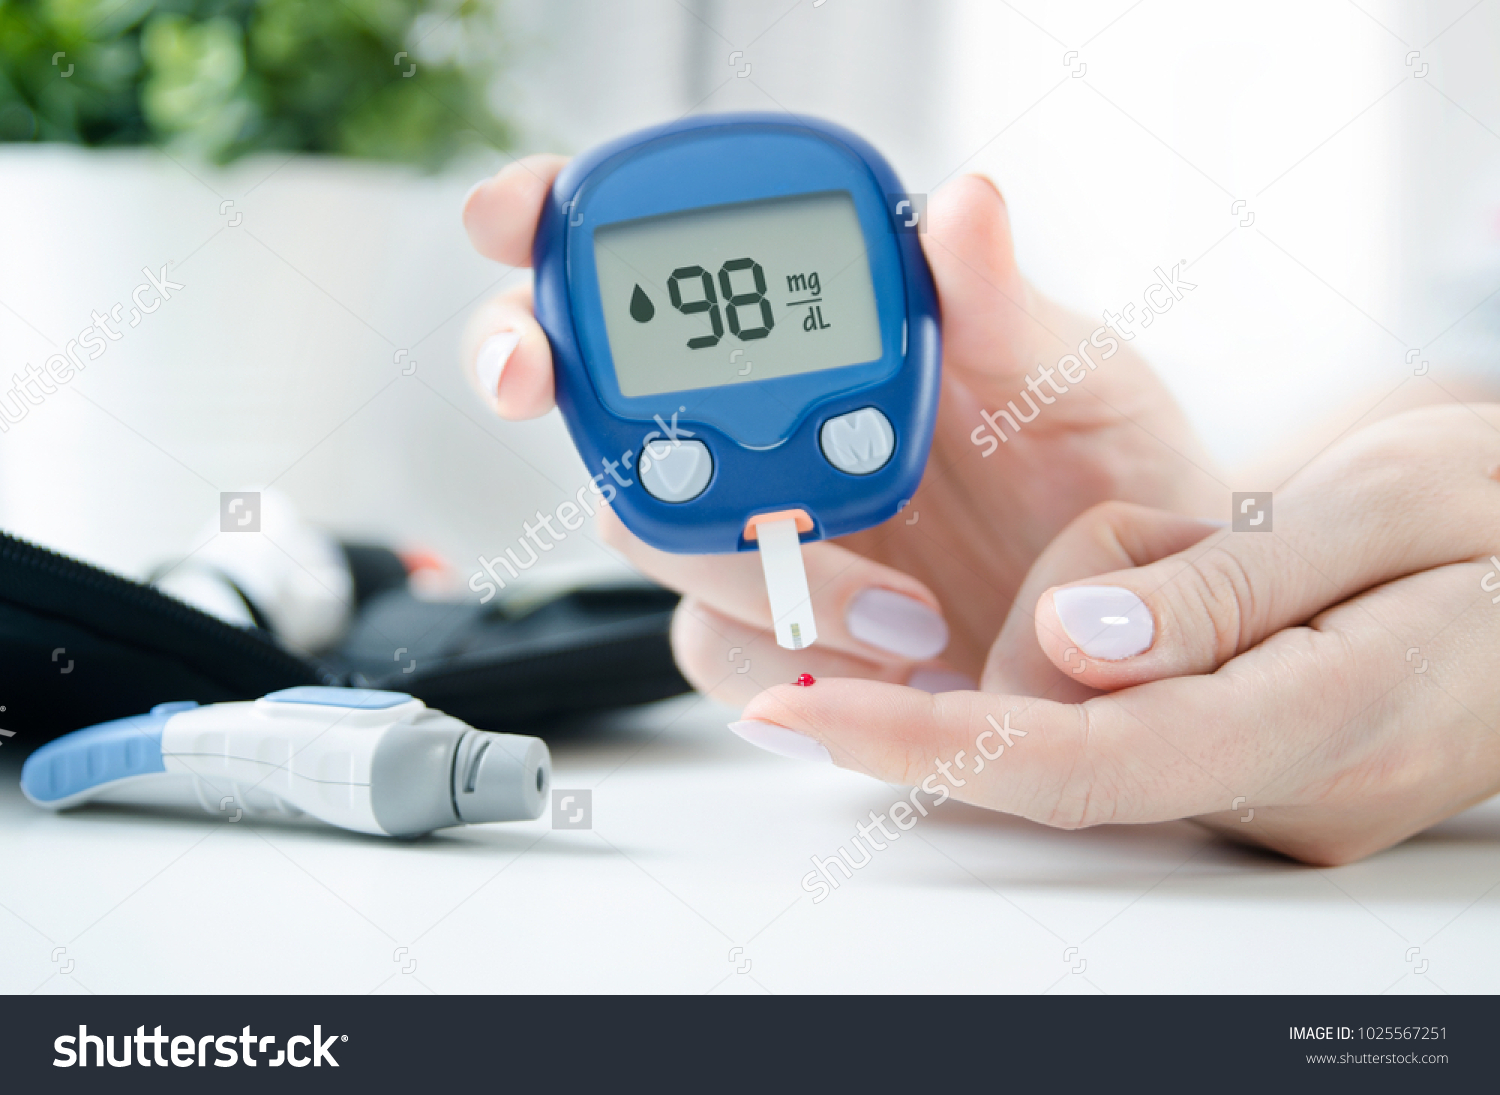 Diabetes checking blood sugar level. Woman using lancelet and glucometer at home. #1025567251